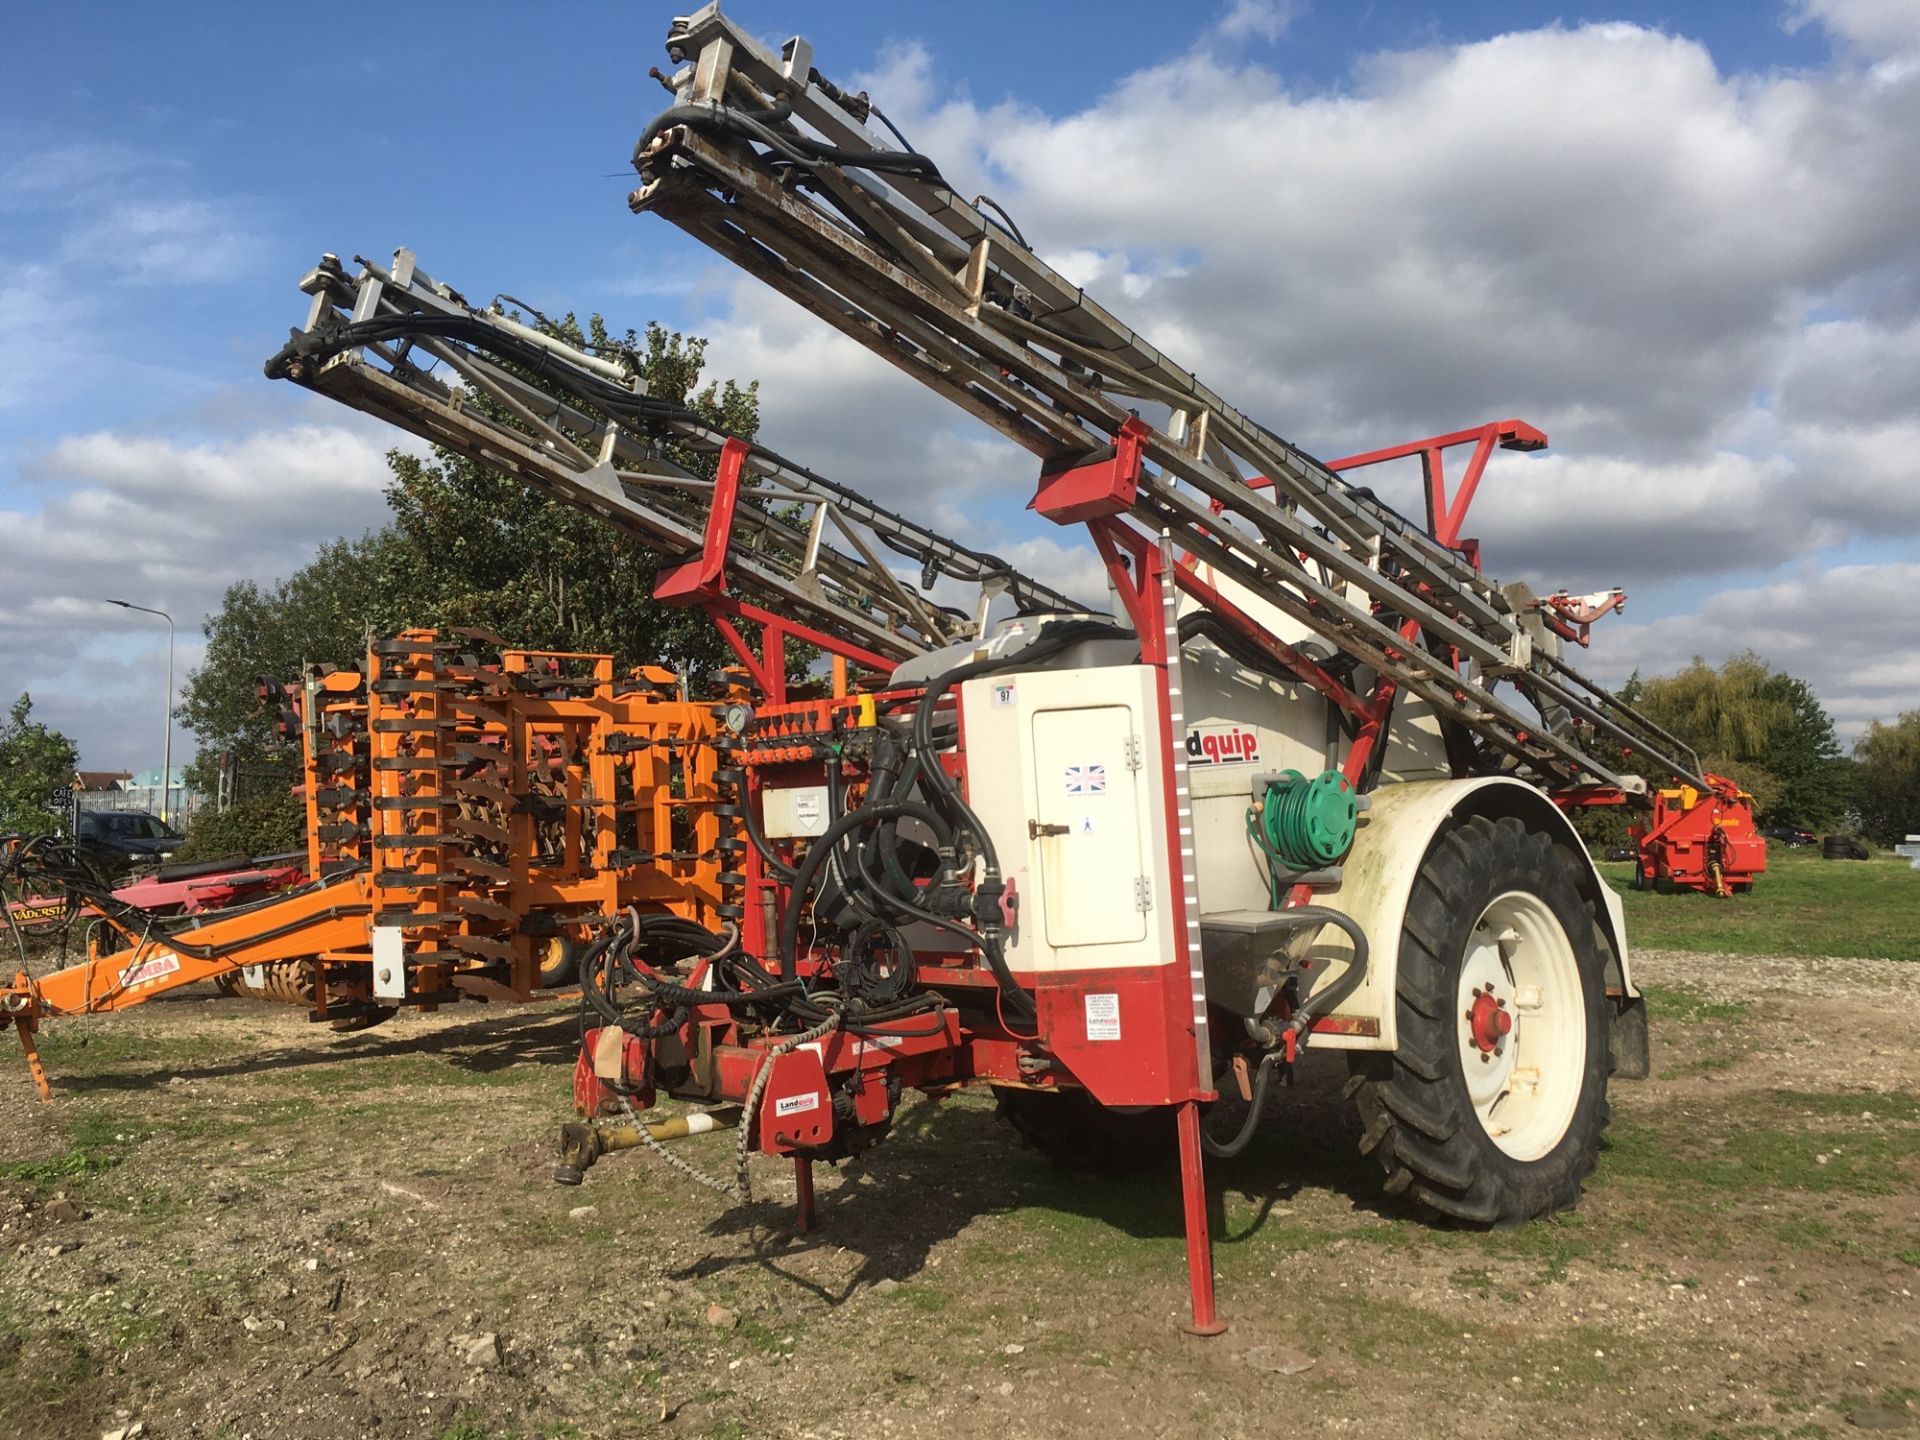 2008 Landquip 3500 Trailed Sprayer, 24m, 3500L Tank, 300L Clean Water, Tracking Steering, 6 Section